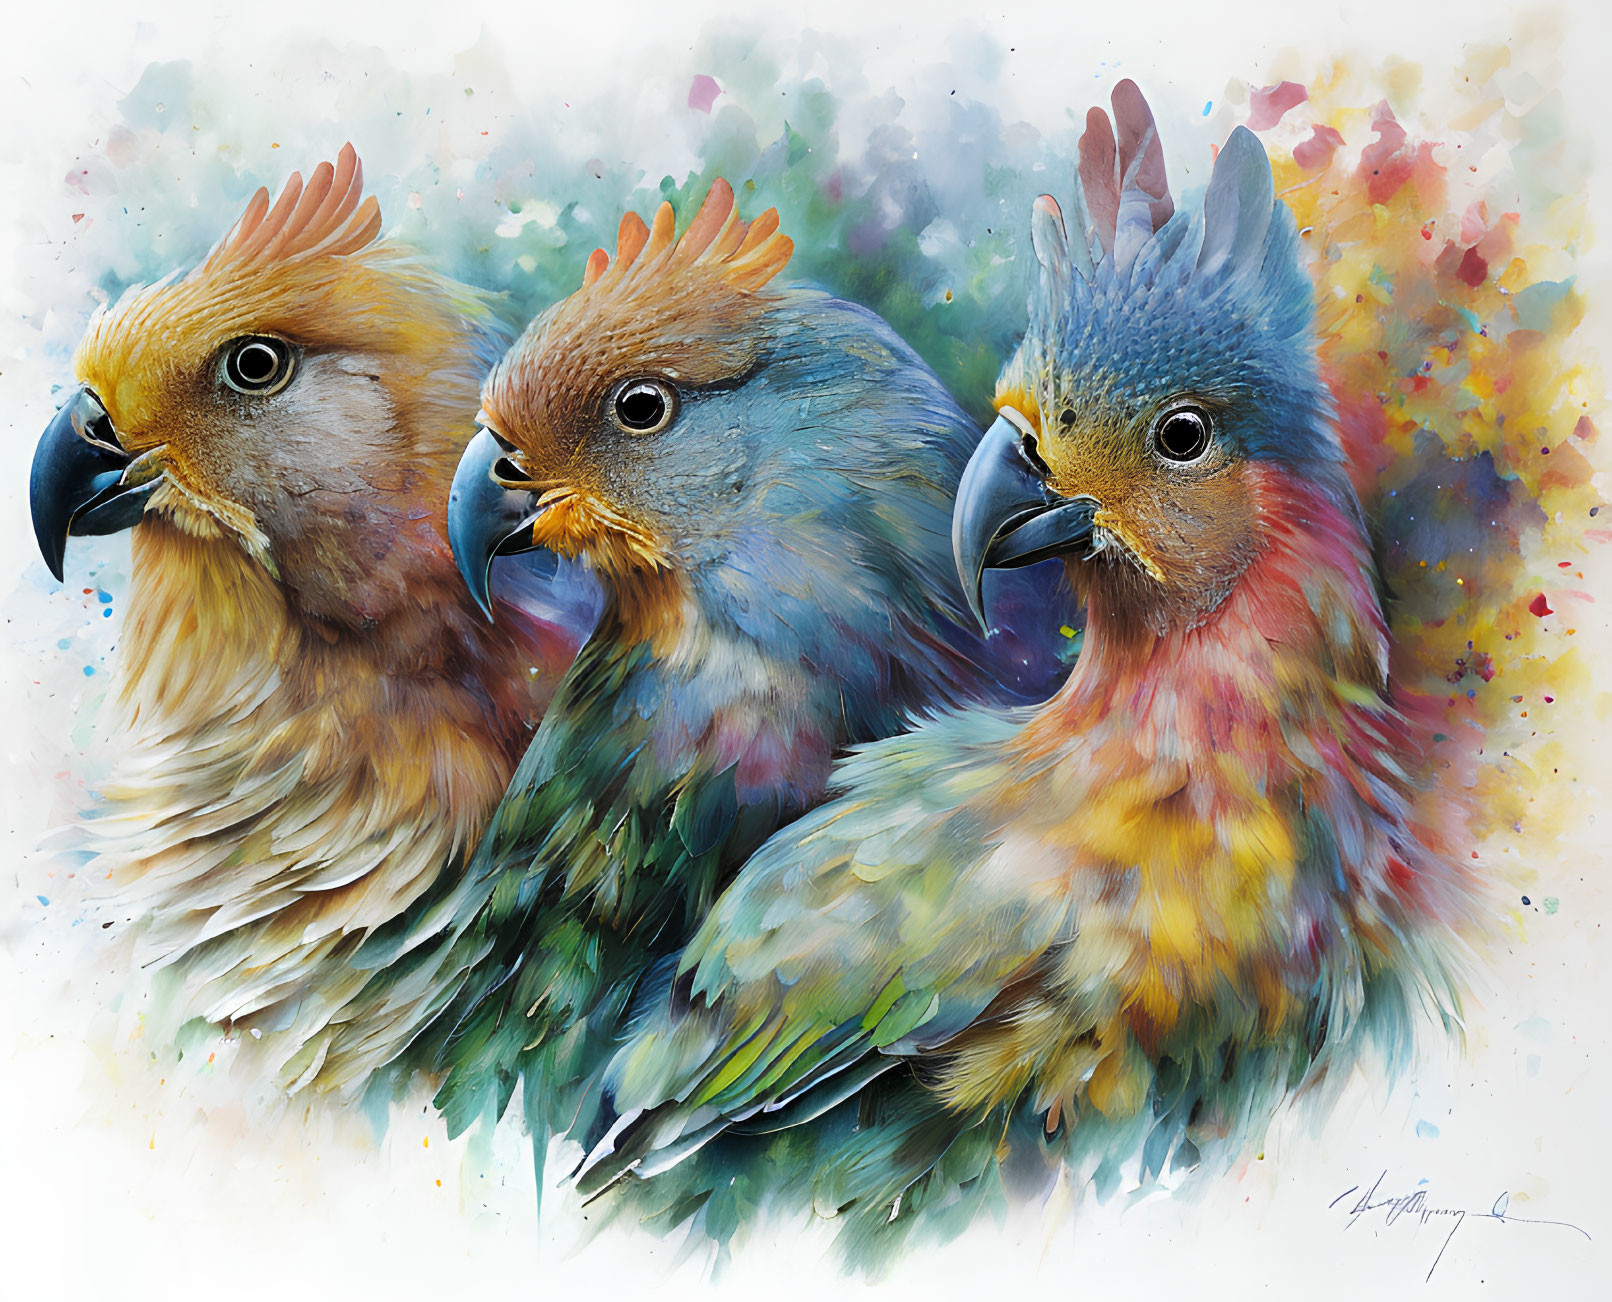 Colorful Parrots in Dynamic Watercolor Art Style